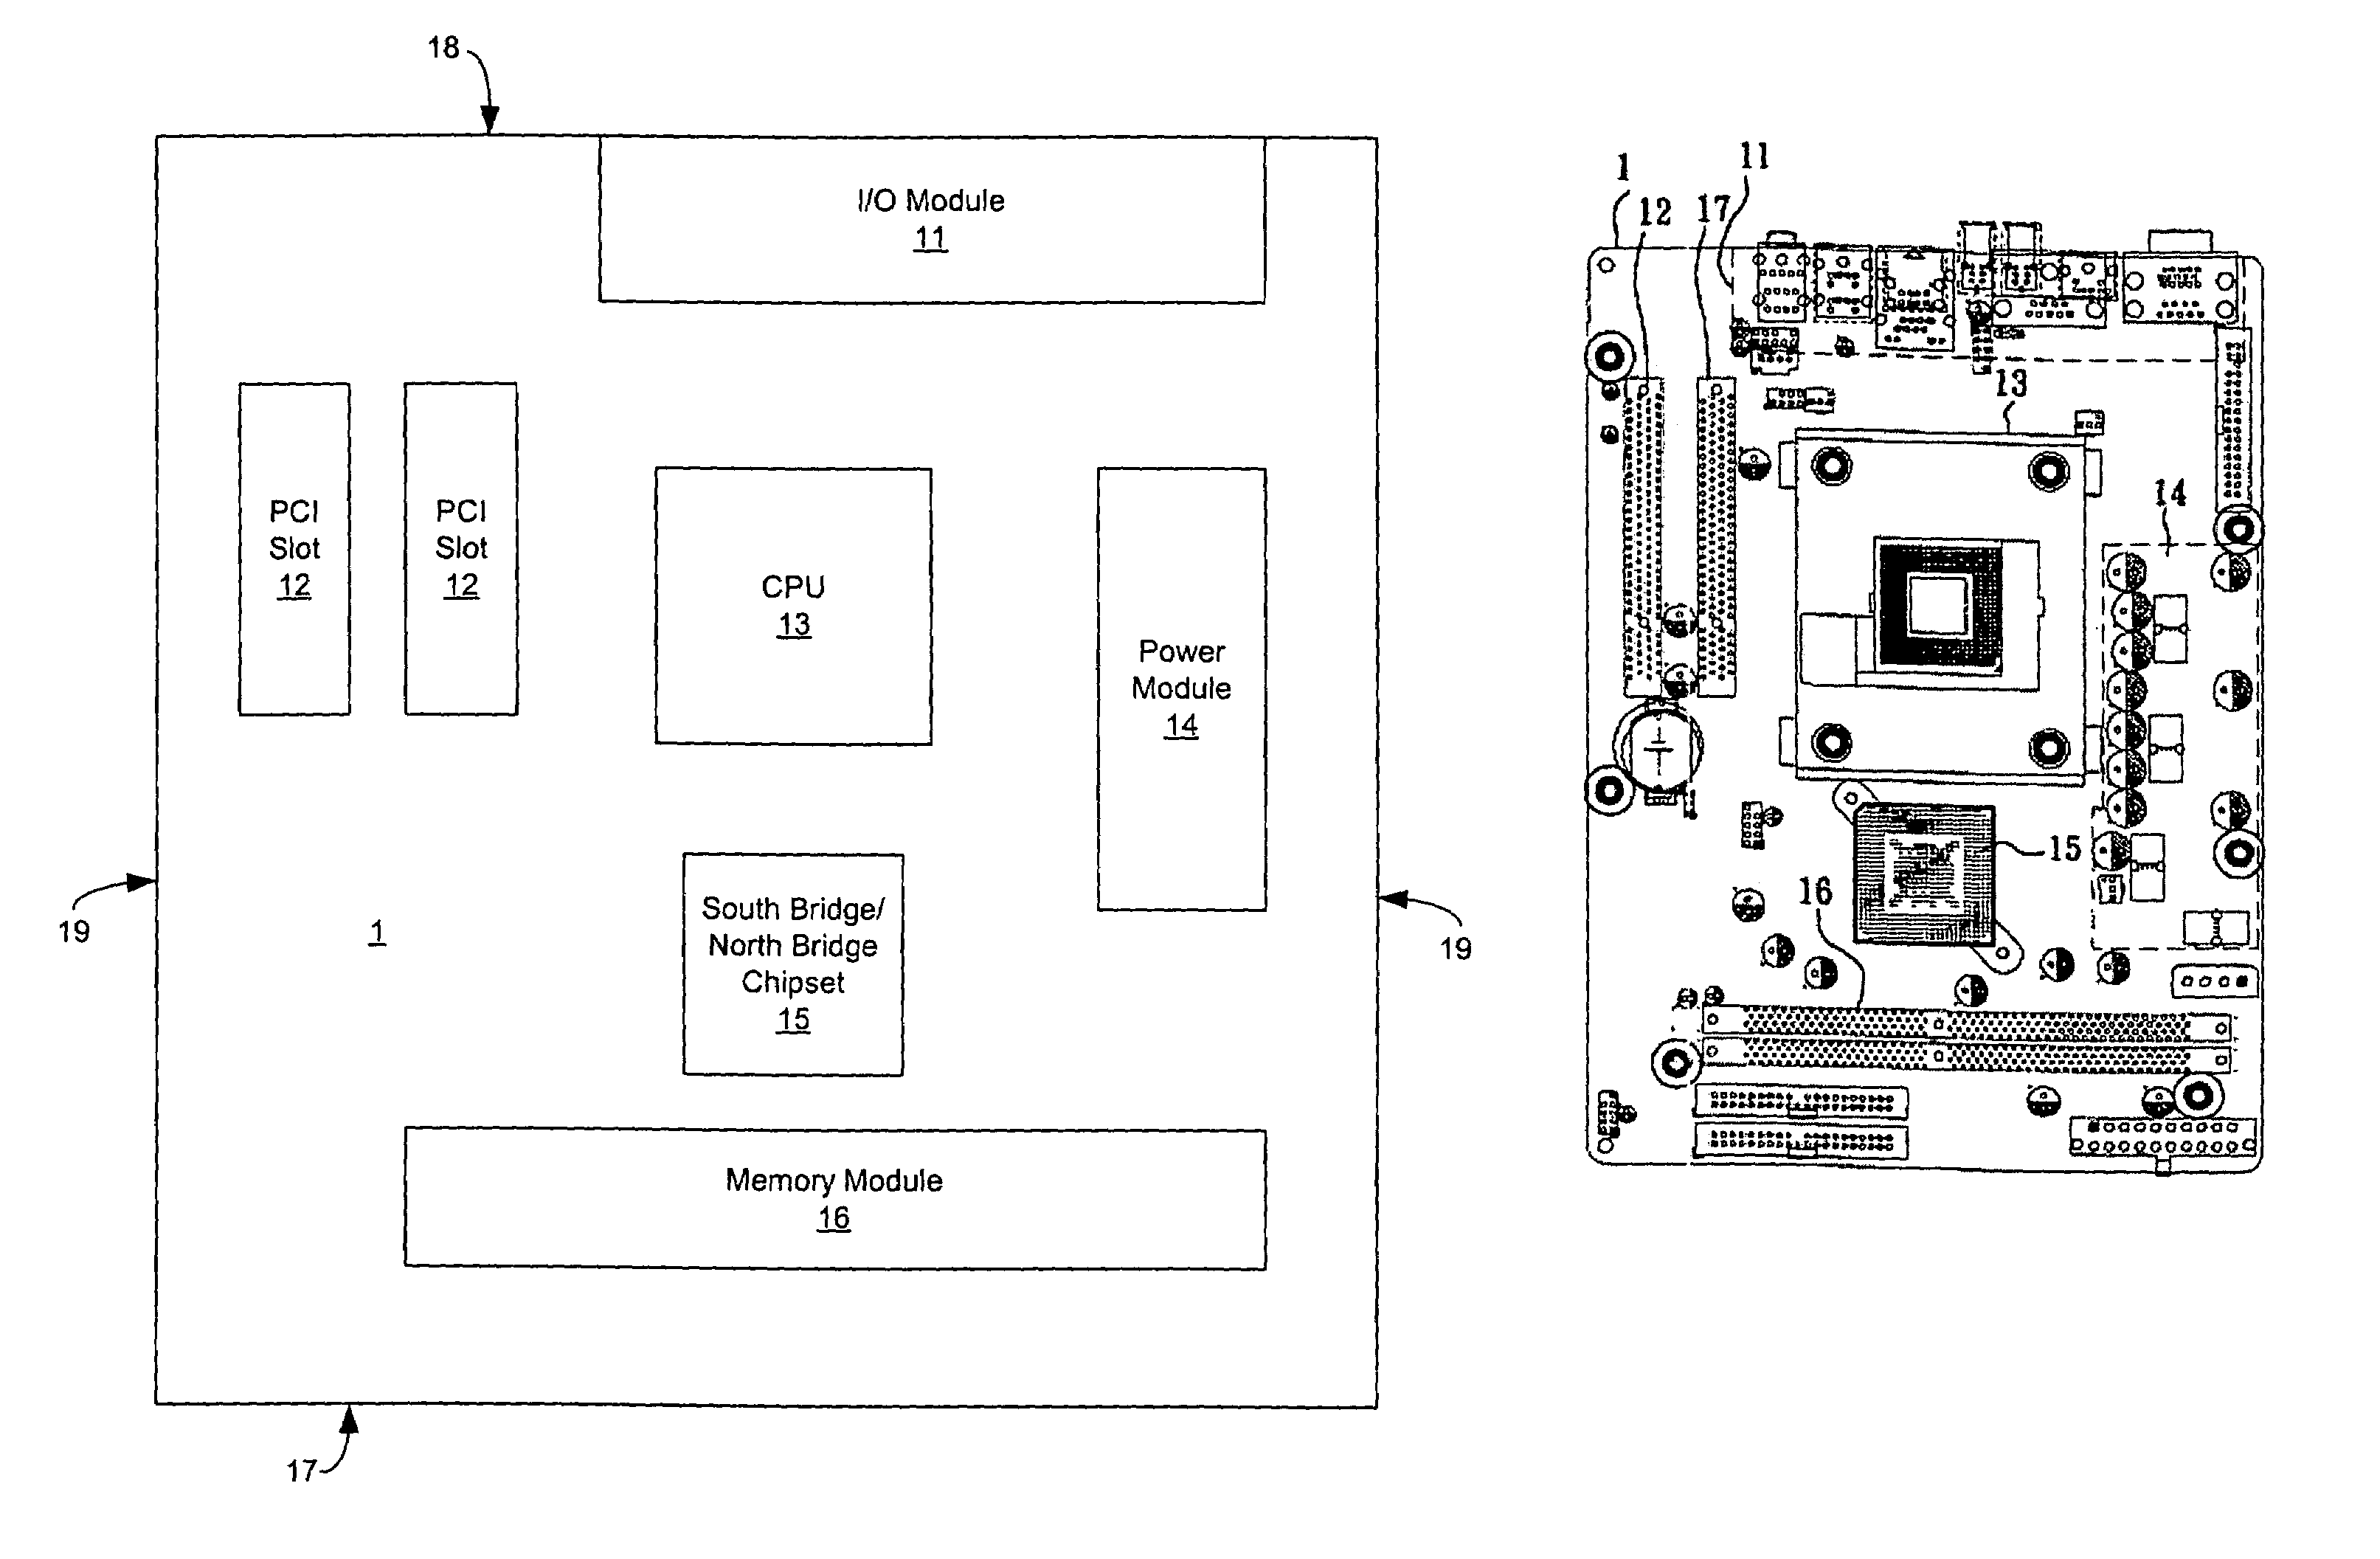 Placement structure of an integrated motherboard for small form factor computer